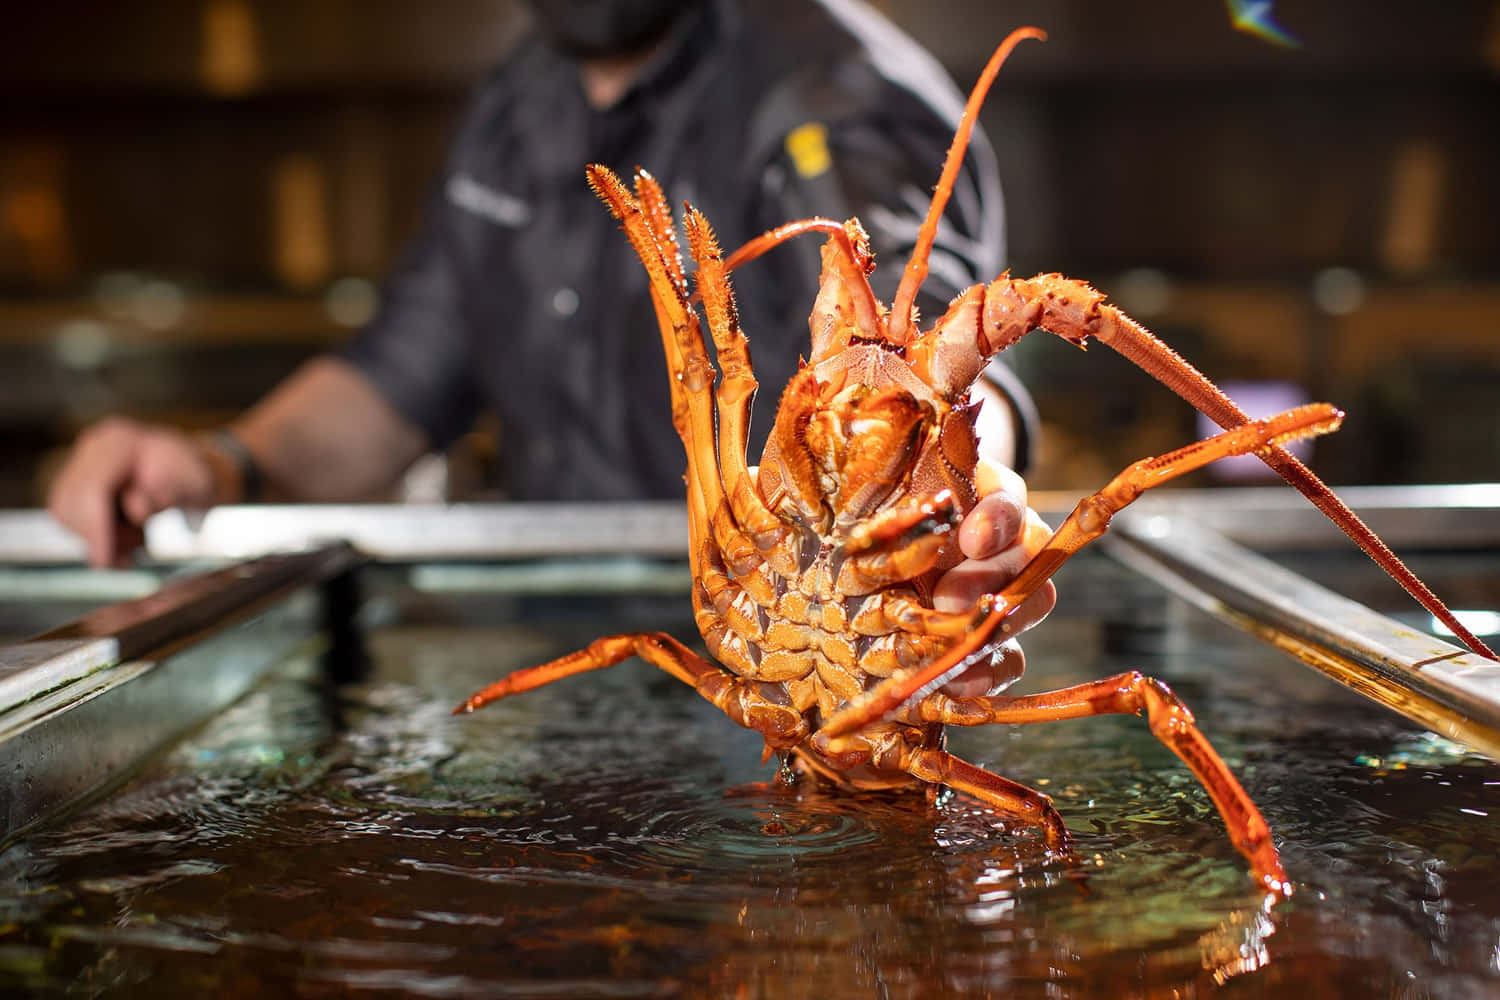 Spiny Lobster Held By Chef Wallpaper